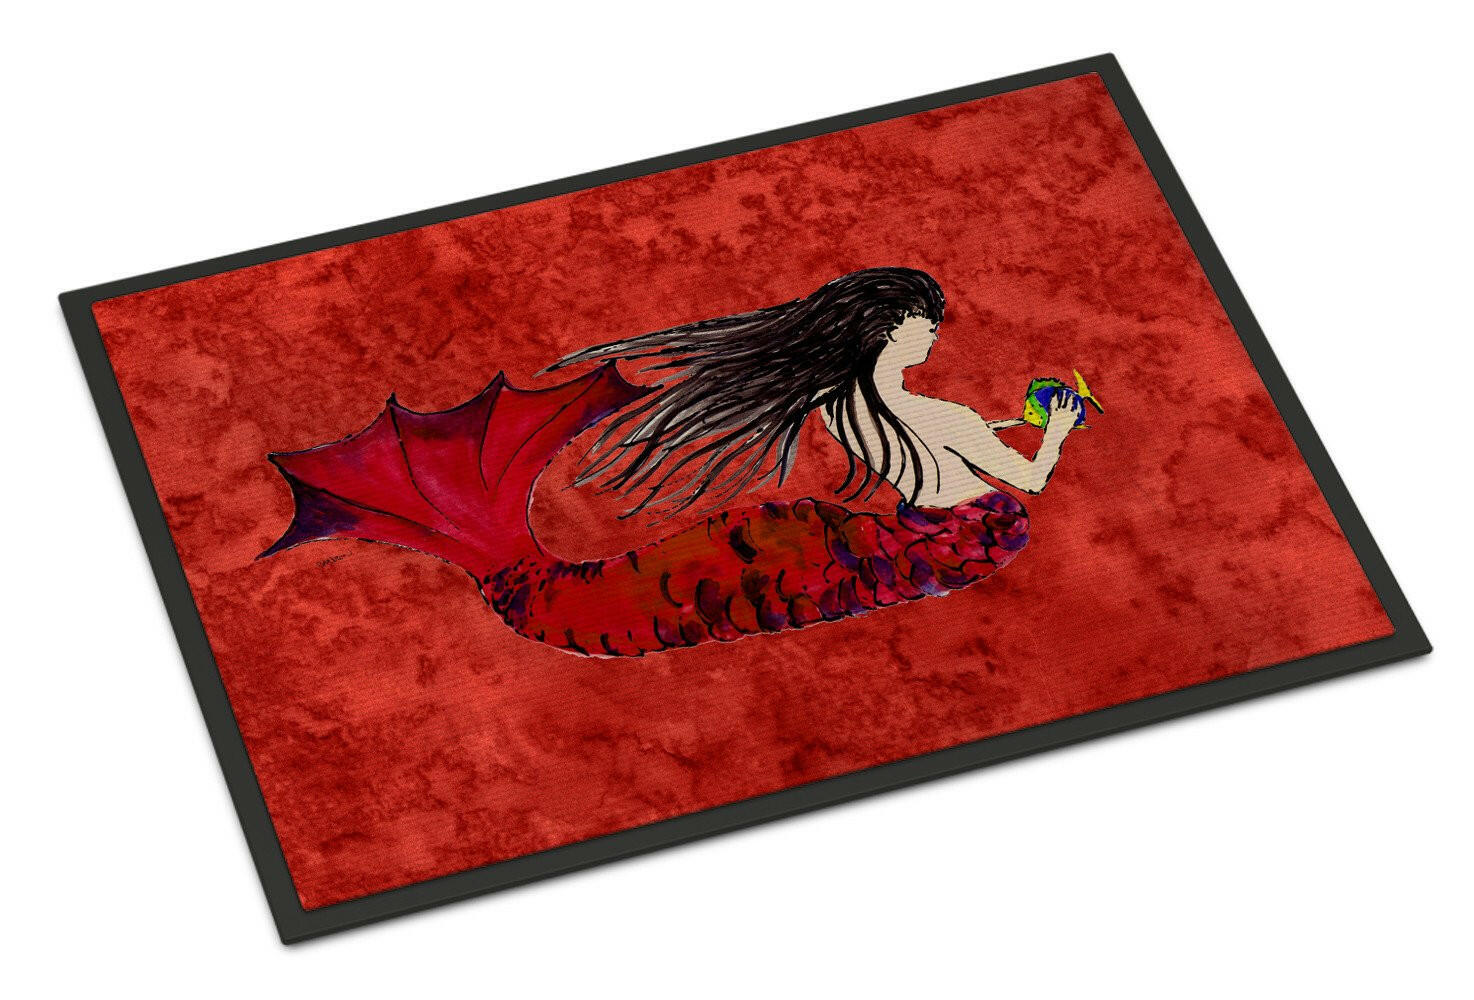 Black Haired Mermaid on Red Indoor or Outdoor Mat 18x27 8726MAT - the-store.com